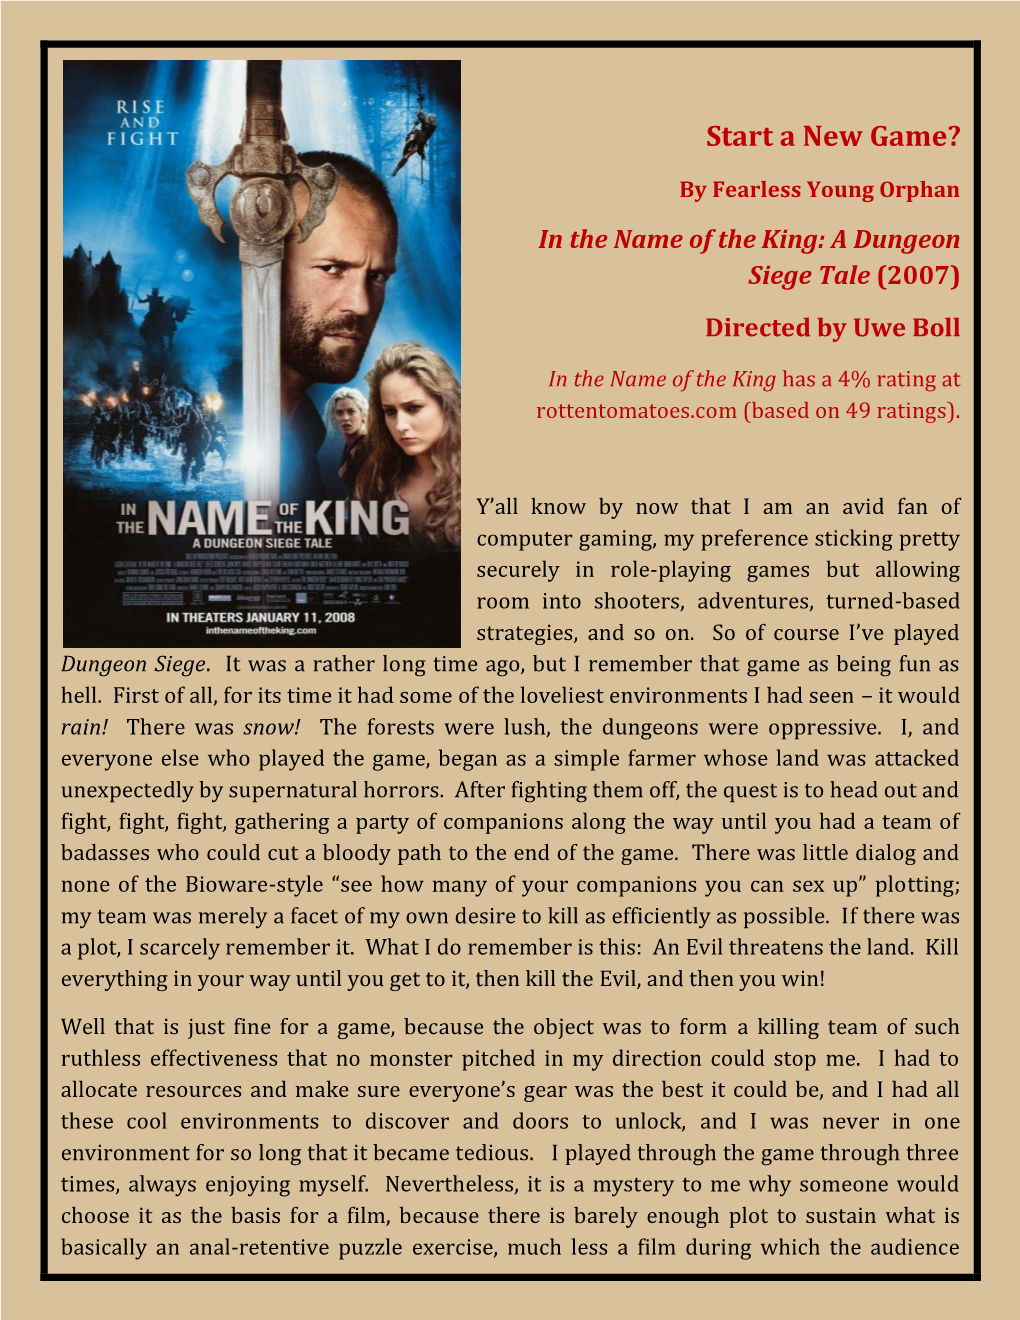 In the Name of the King: a Dungeon Siege Movie